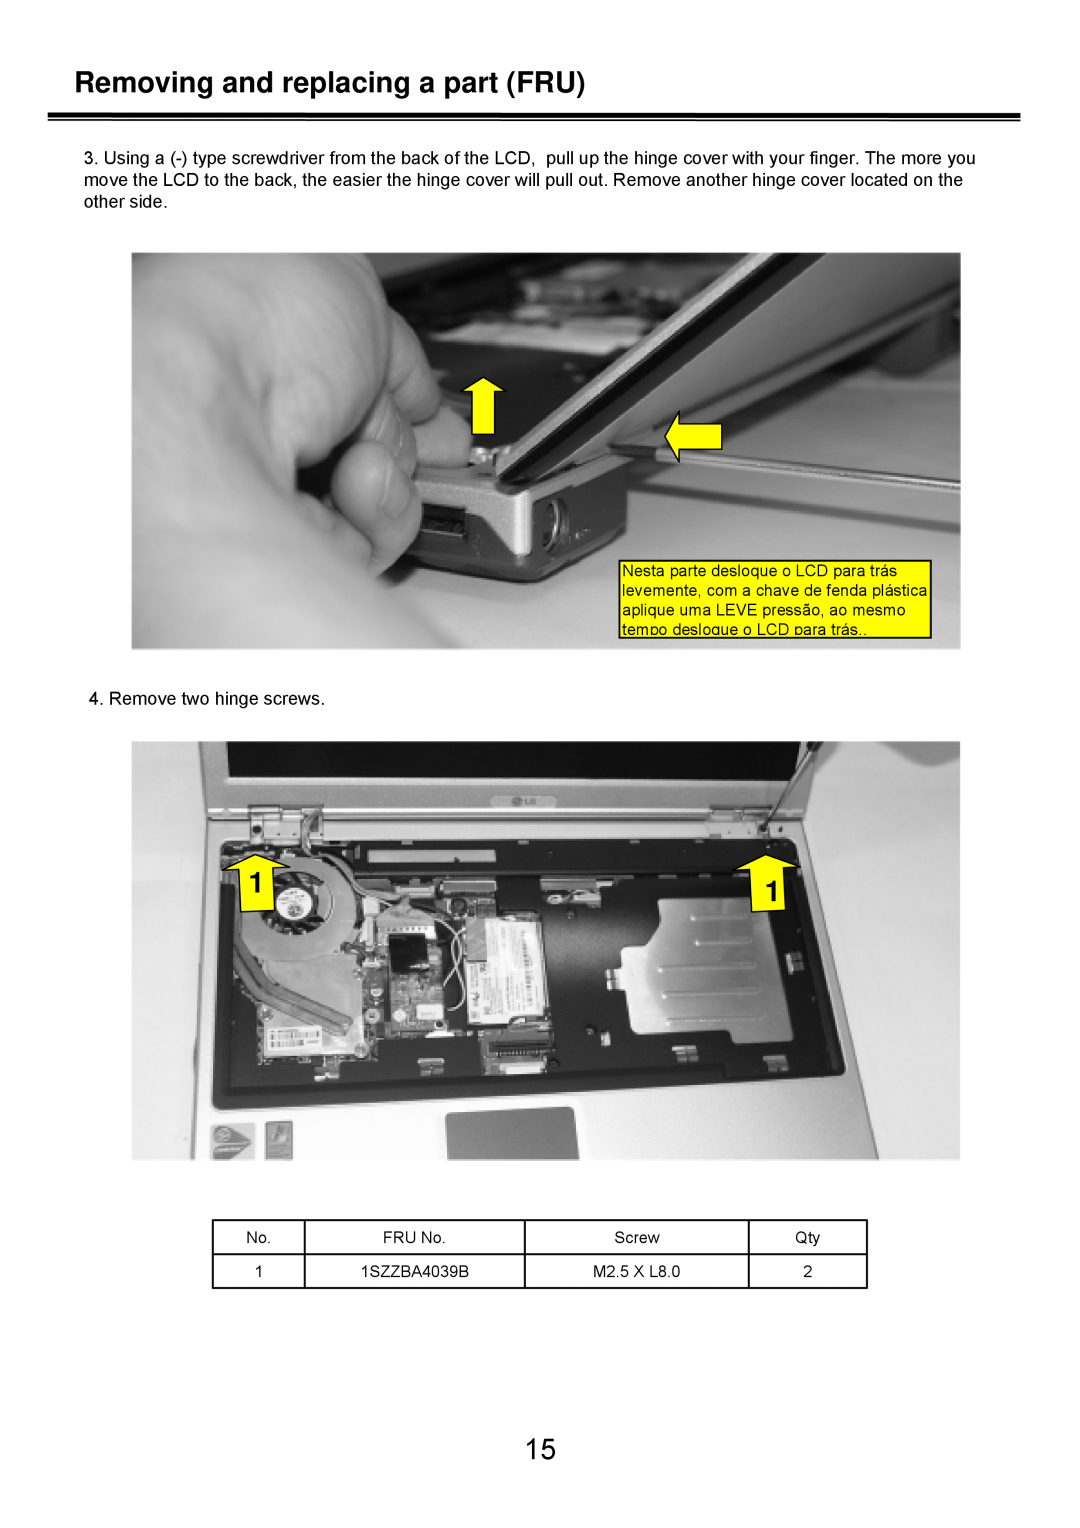 LG Electronics LS50 service manual Remove two hinge screws, Removing and replacing a part FRU 